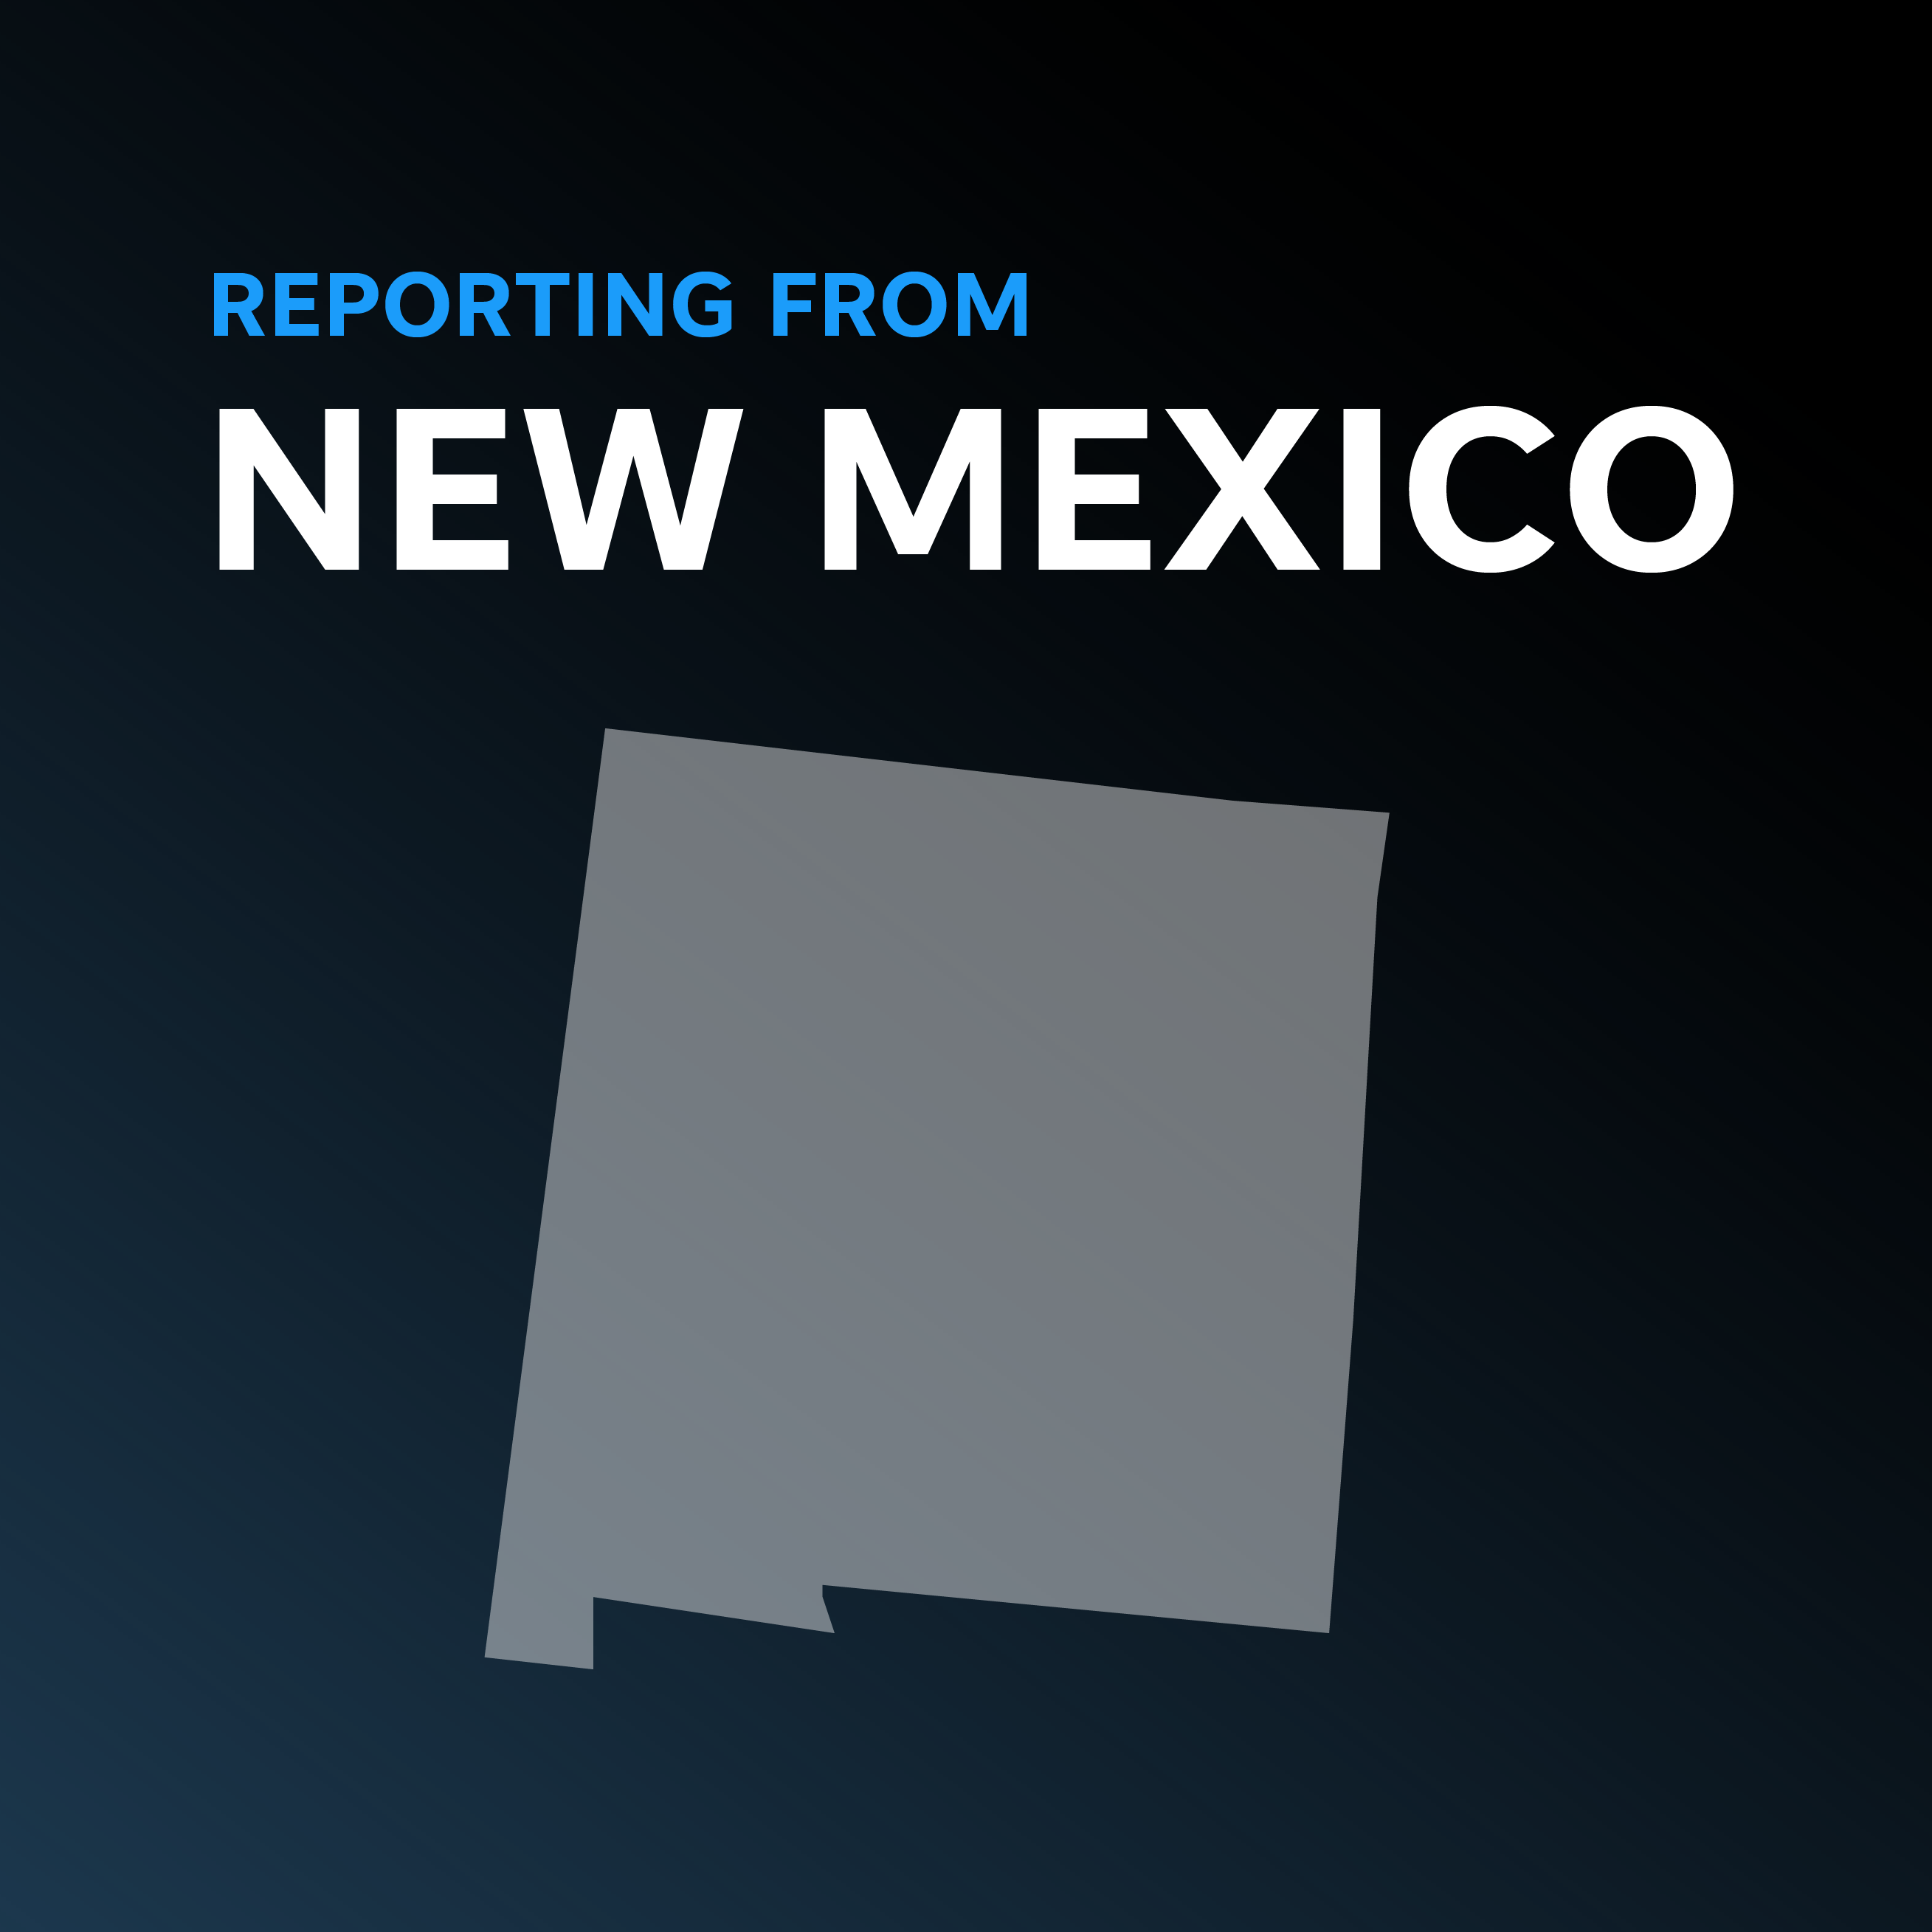 News out of New Mexico